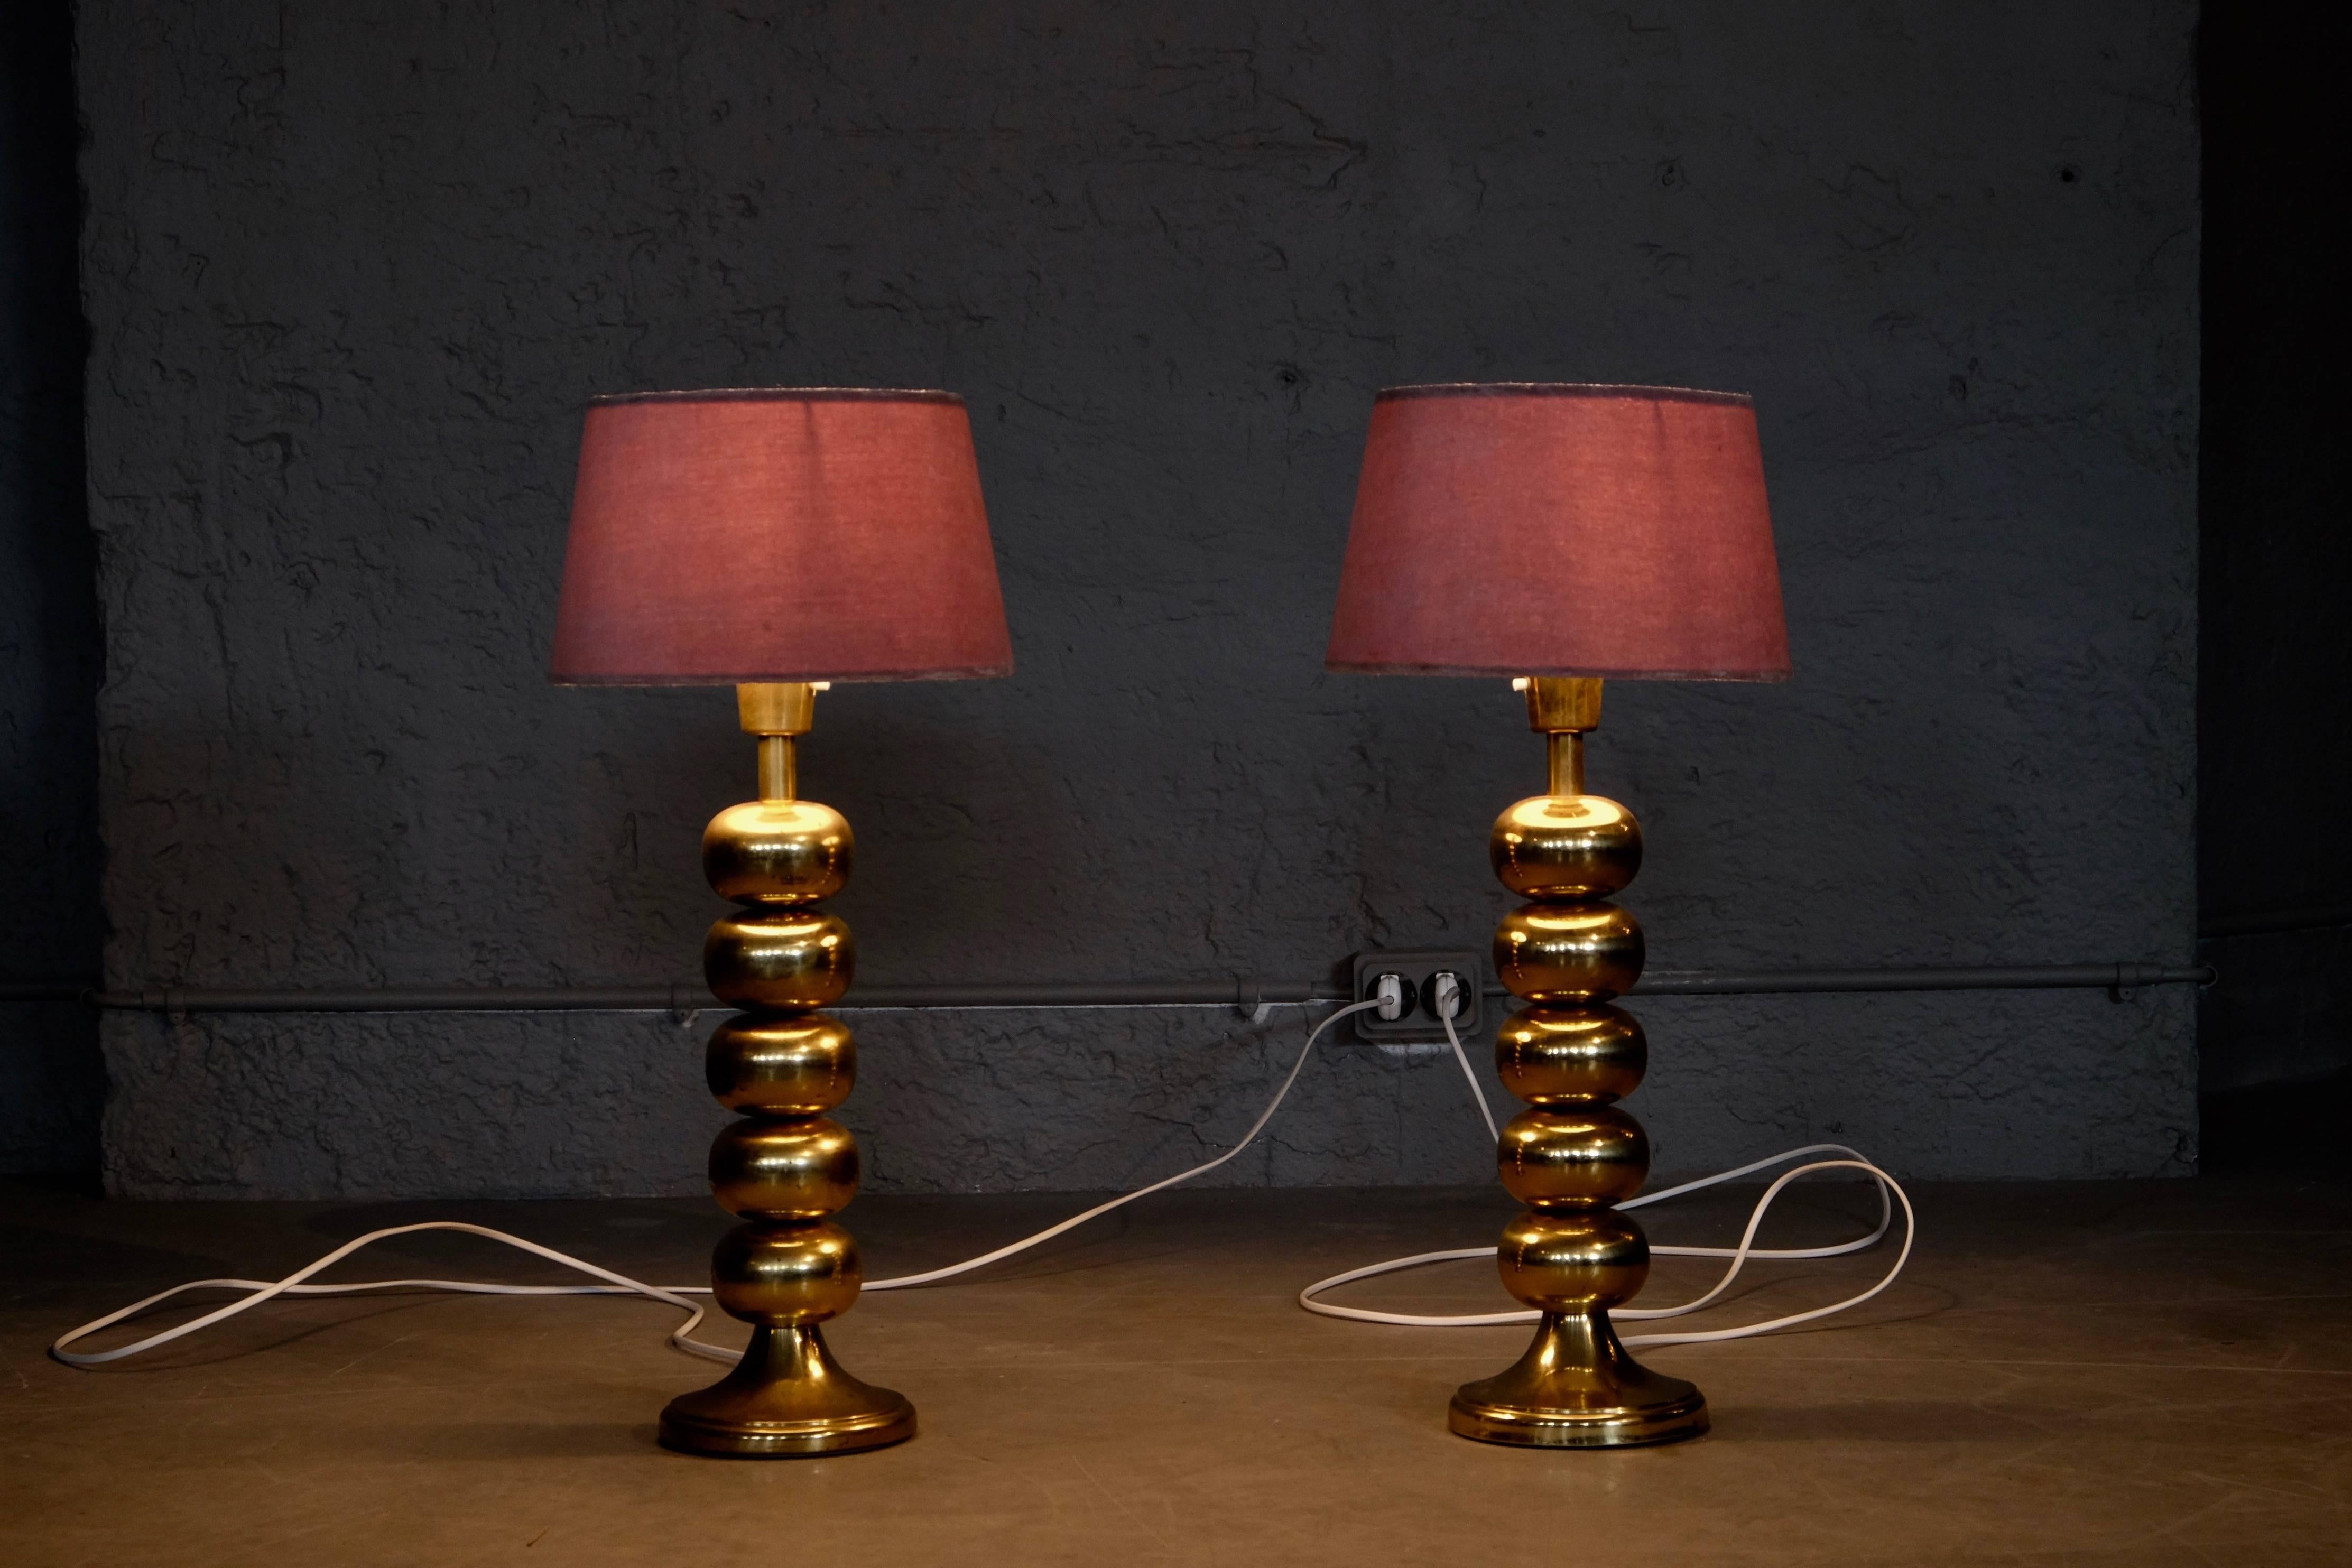 Scandinavian Modern Pair of Brass Table Lamps by Aneta, Sweden, 1960s For Sale